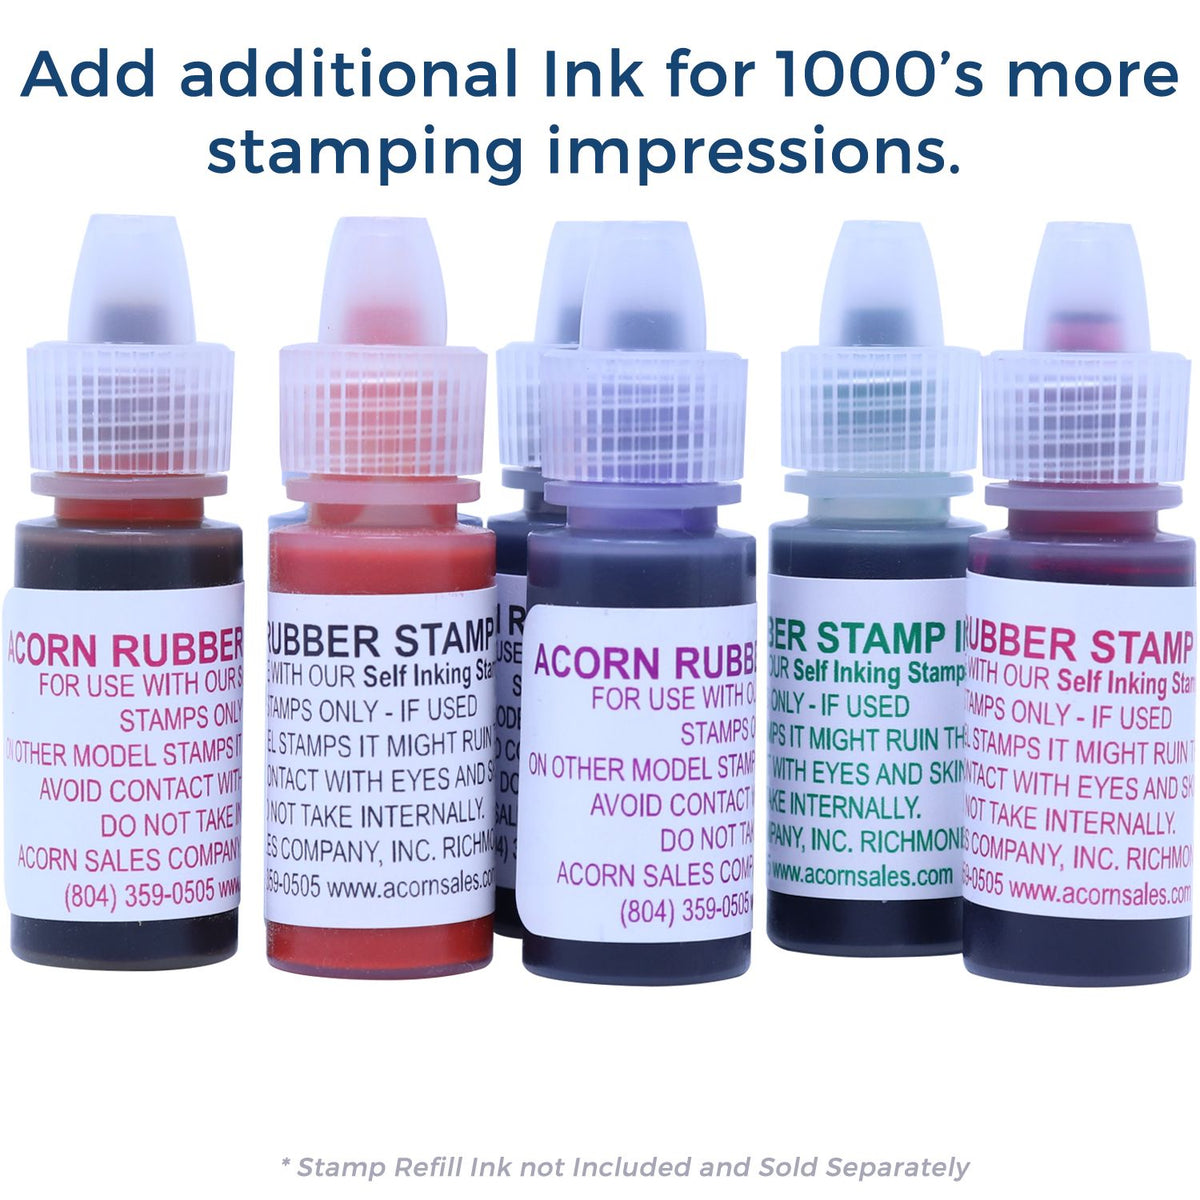 Self Inking Stamp Refill Ink Available